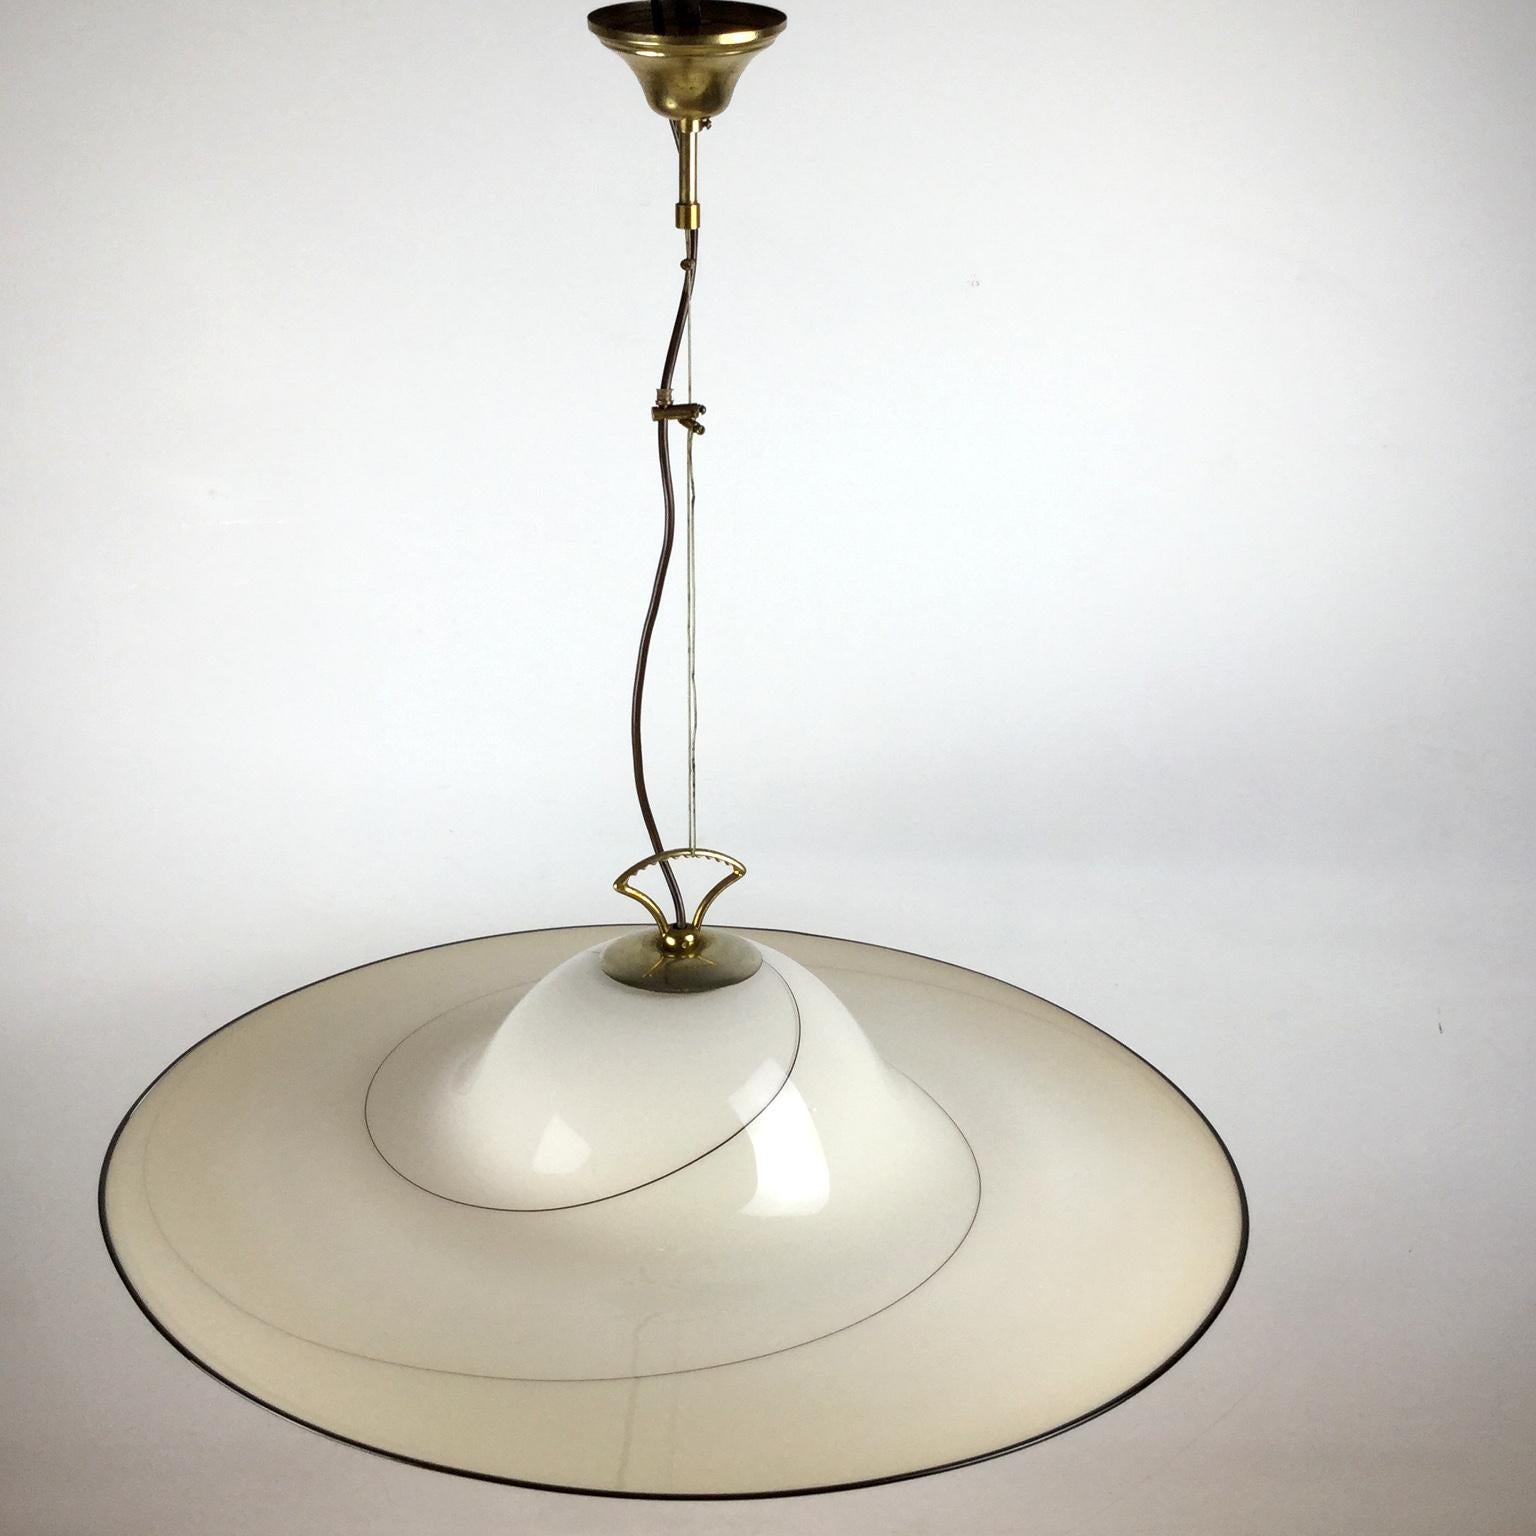 Bell-shaped pendant lamp, in hand blown glass, attributed Seguso Vetri d'Arte Murano workshops
This creamy glass that will give you amazing light, with one swirling decorative line and a brass adjustable mounting finish.
  